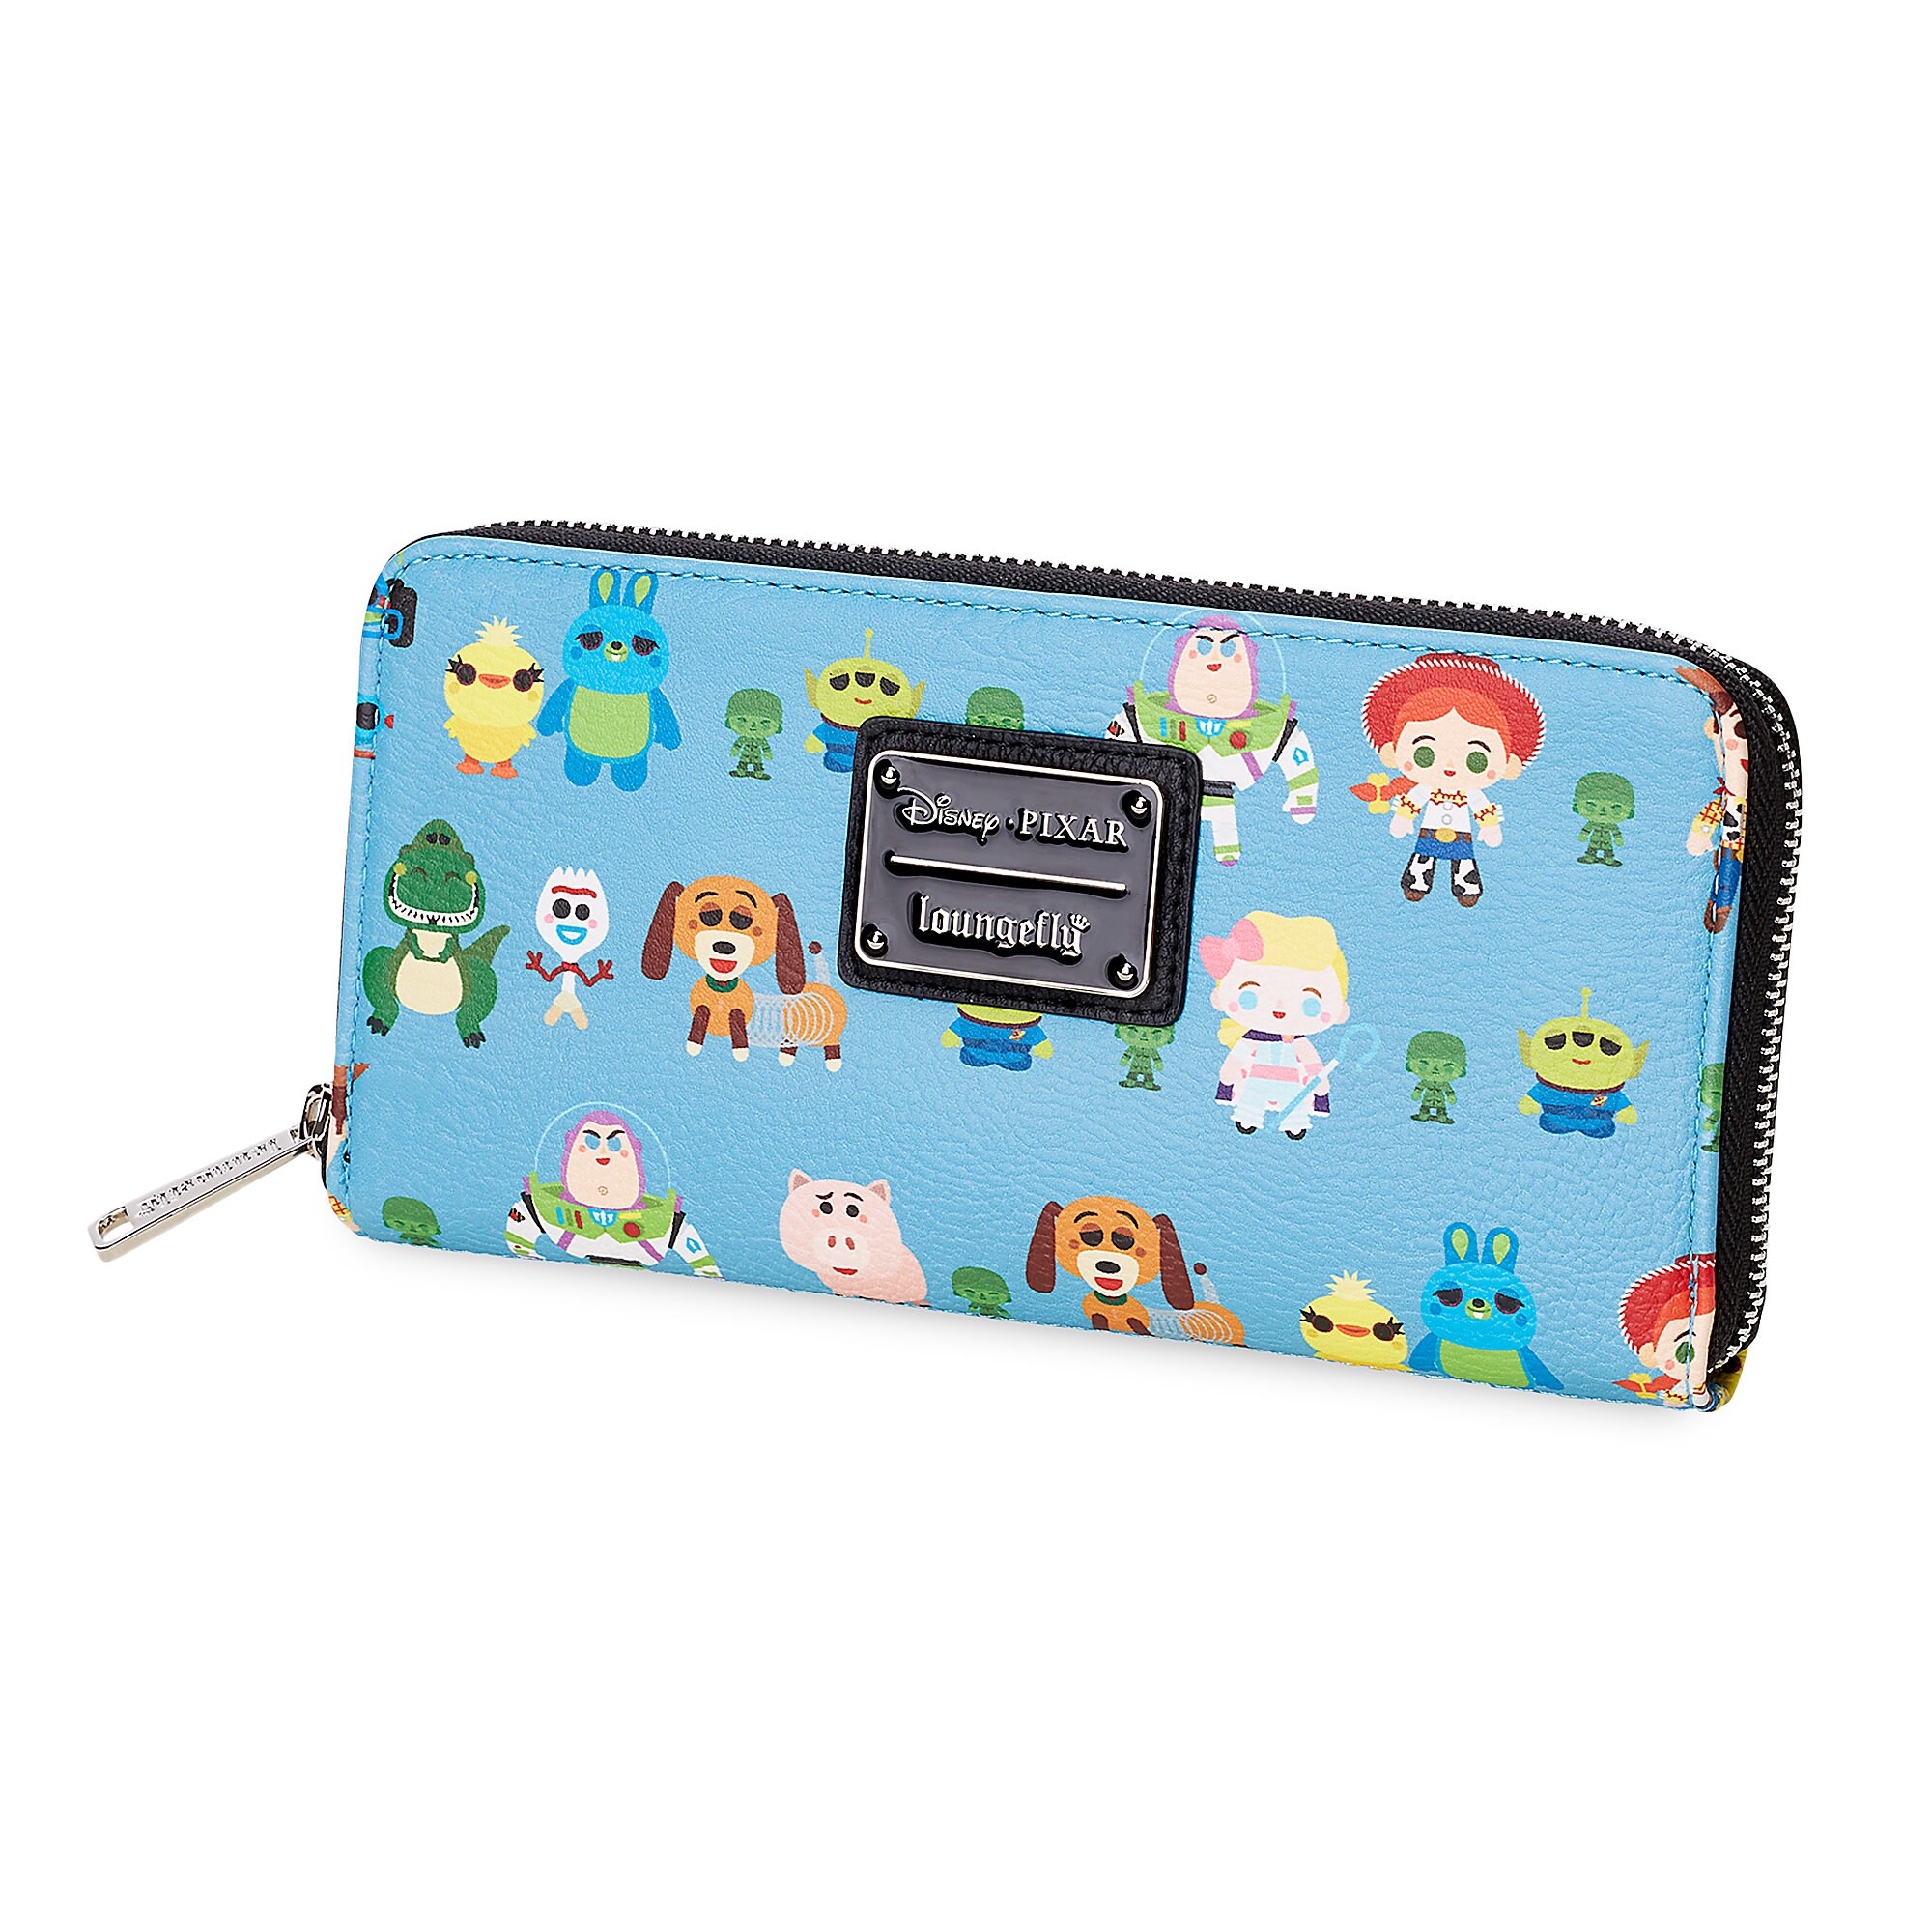 Toy Story 4 Zip-Around Wallet by Loungefly